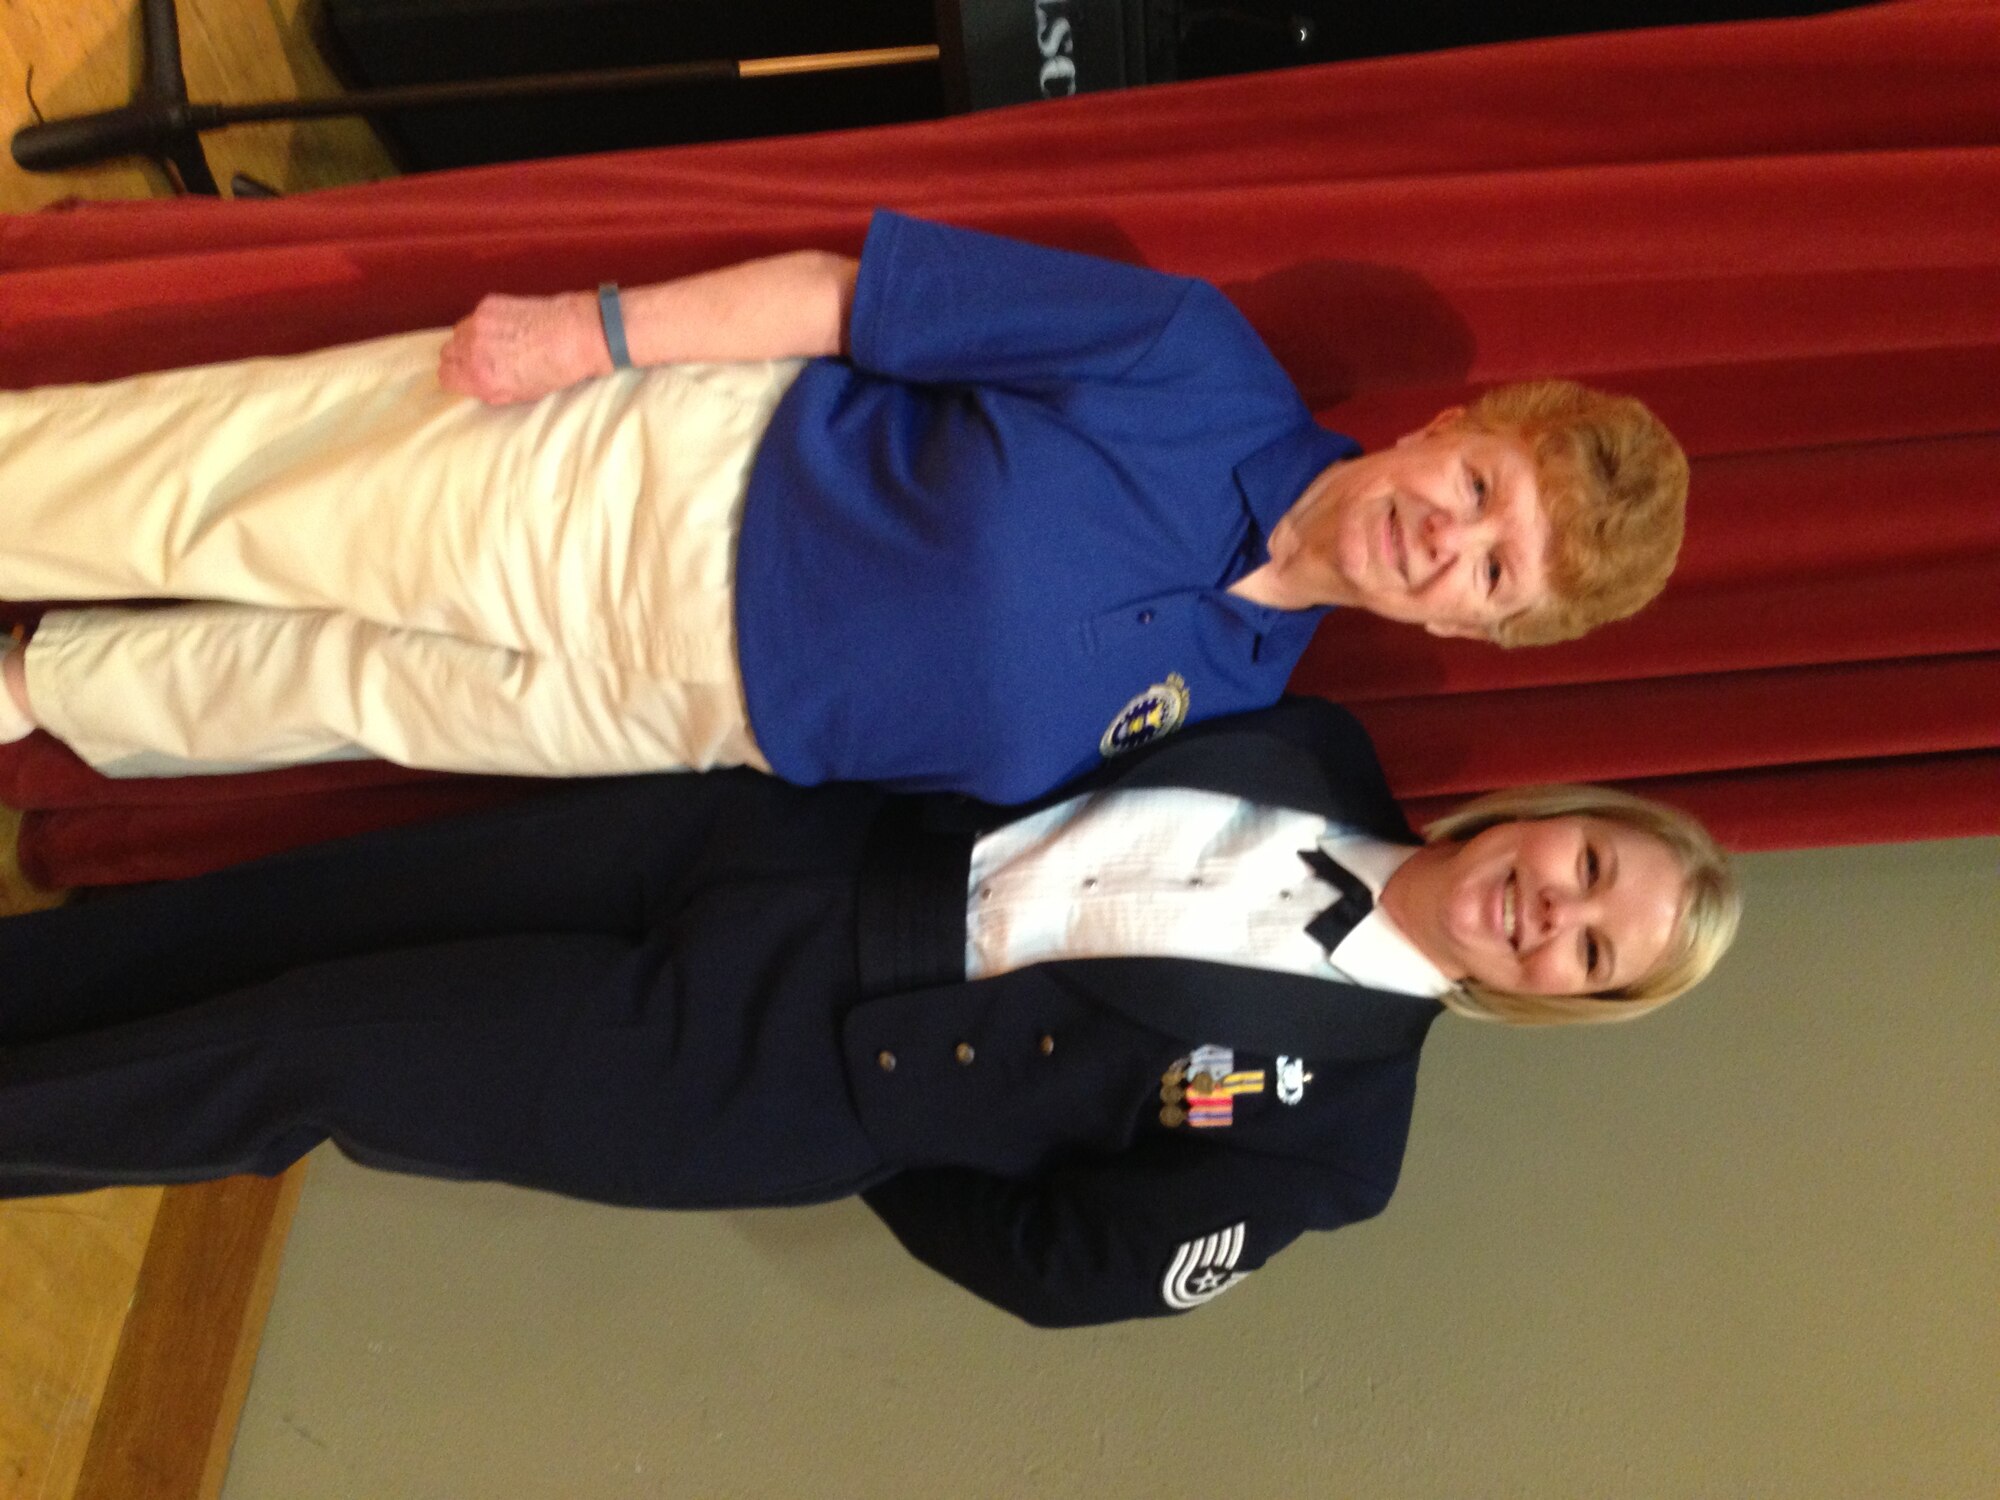 Beverly Passwaters, a former member of the Women in the Air Force Band, attended a U.S. Air Force Band of the Golden West concert in Corvallis, Oregon, June 8, 2014, and met Tech. Sgt. Anna Andrew. Both women play the clarinet. (U.S. Air Force photo/ Master Sgt. Sherry Garza)